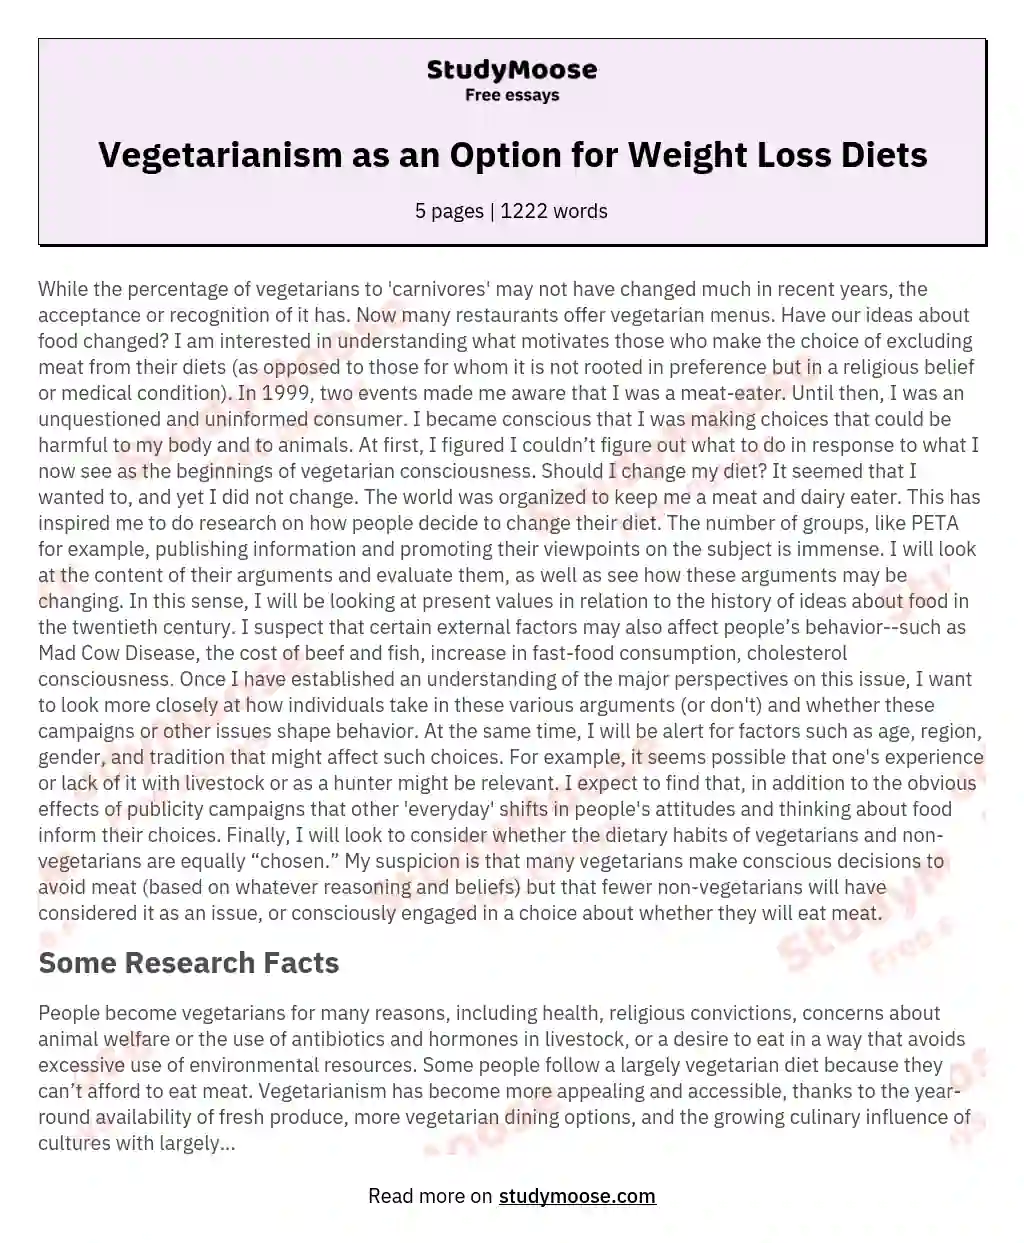 Vegetarianism as an Option for Weight Loss Diets essay